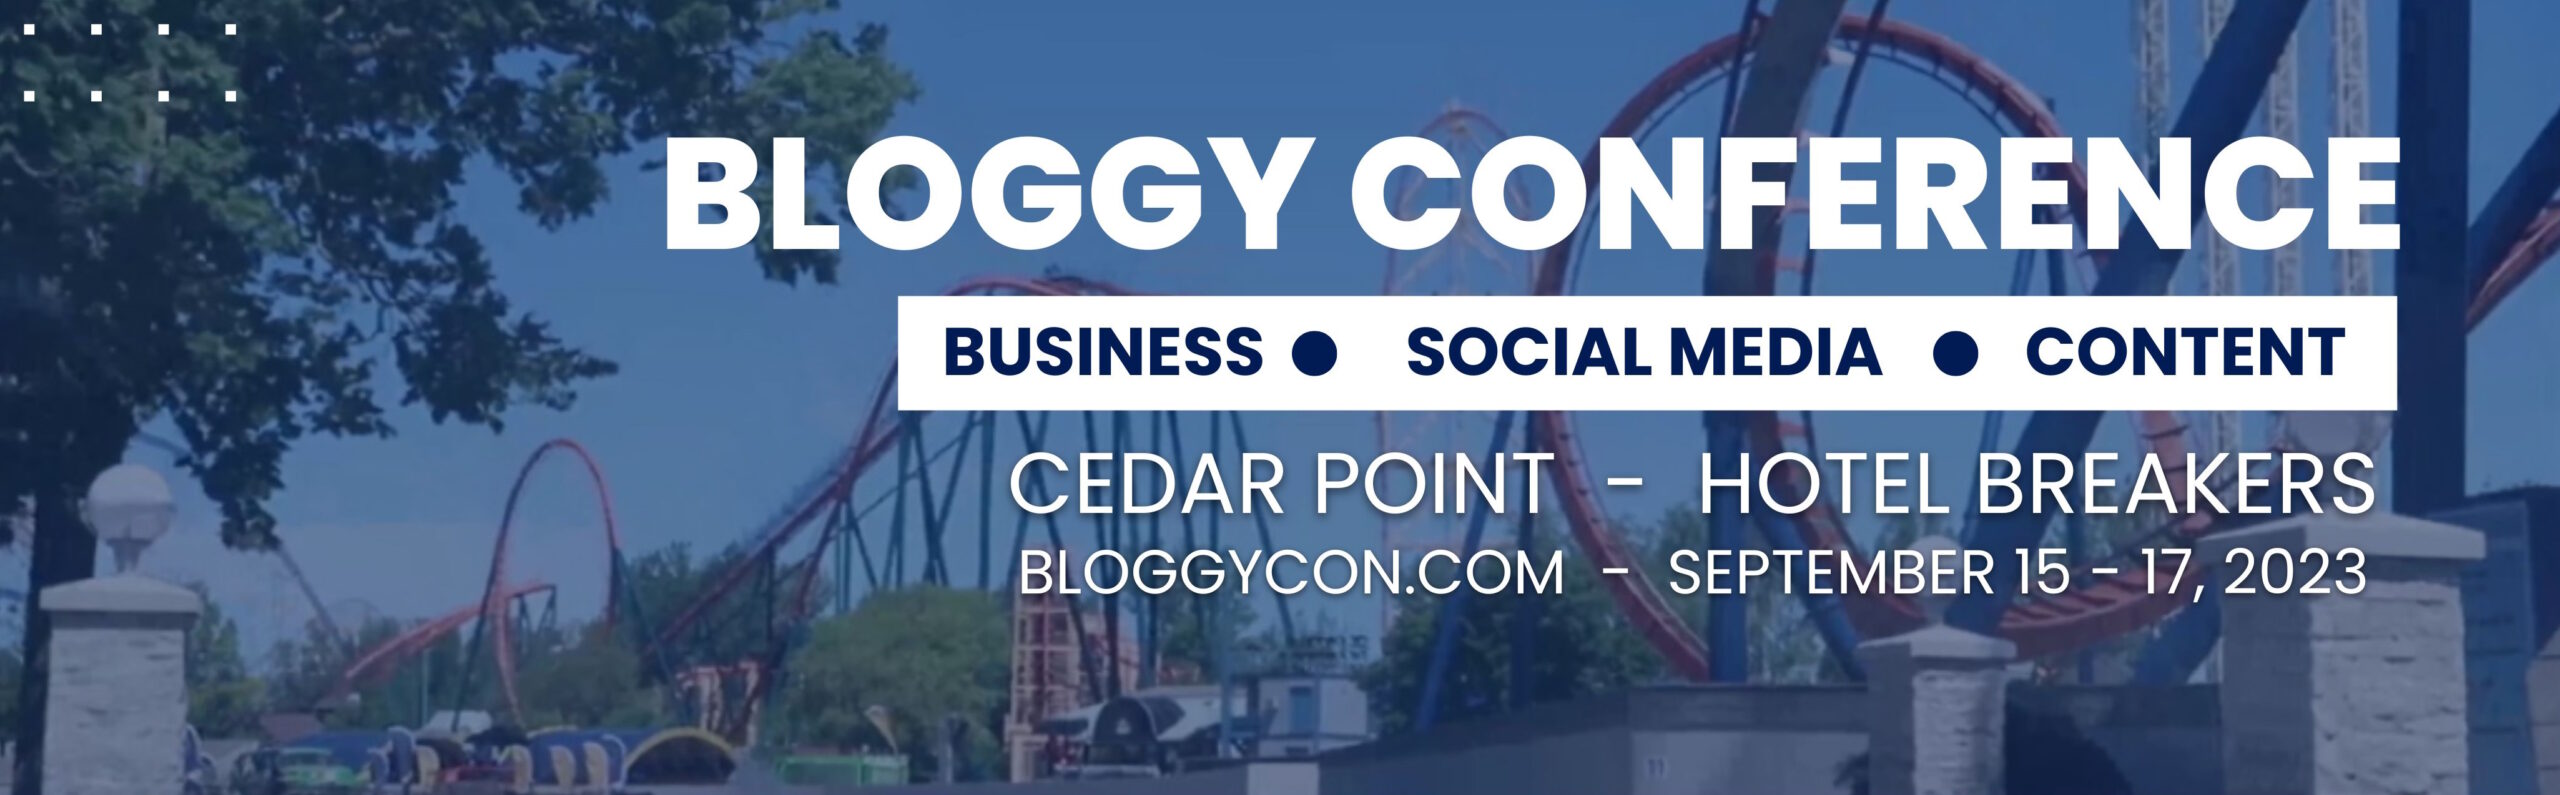 bloggy conference at cedar point